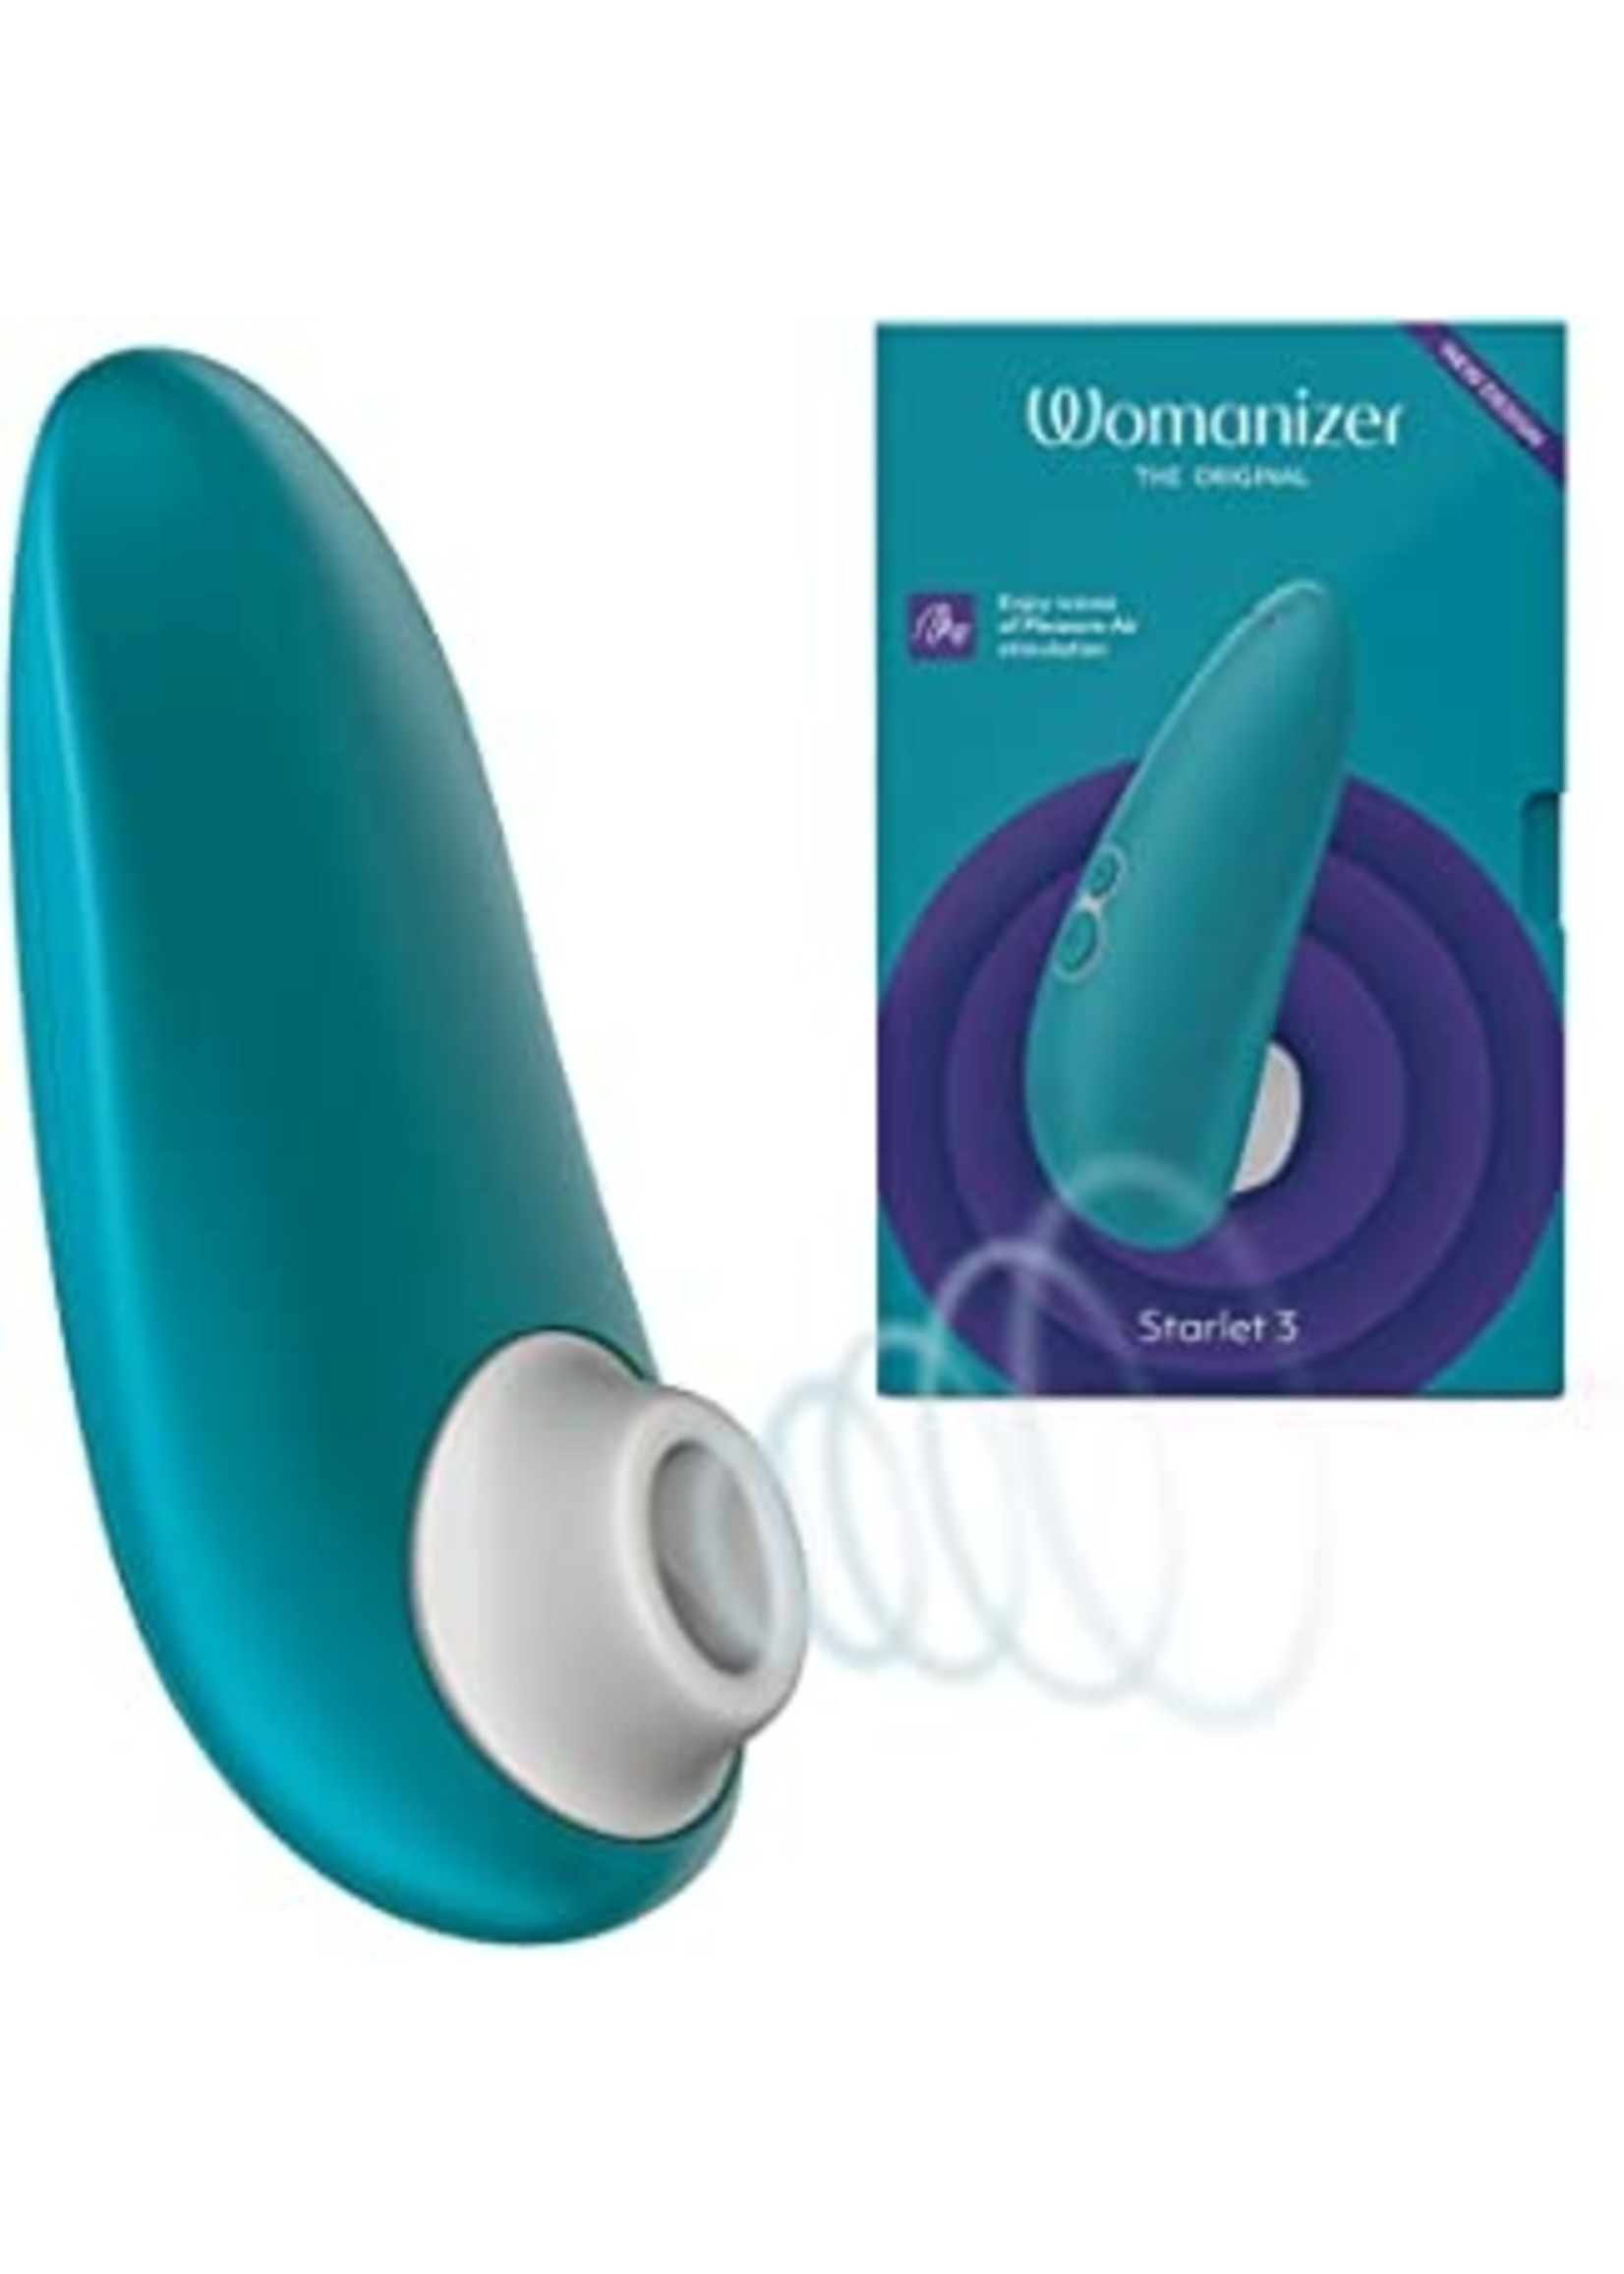 Womanizer Starlet 3 Rechargeable Silicone Clitoral Stimulator in Turquoise